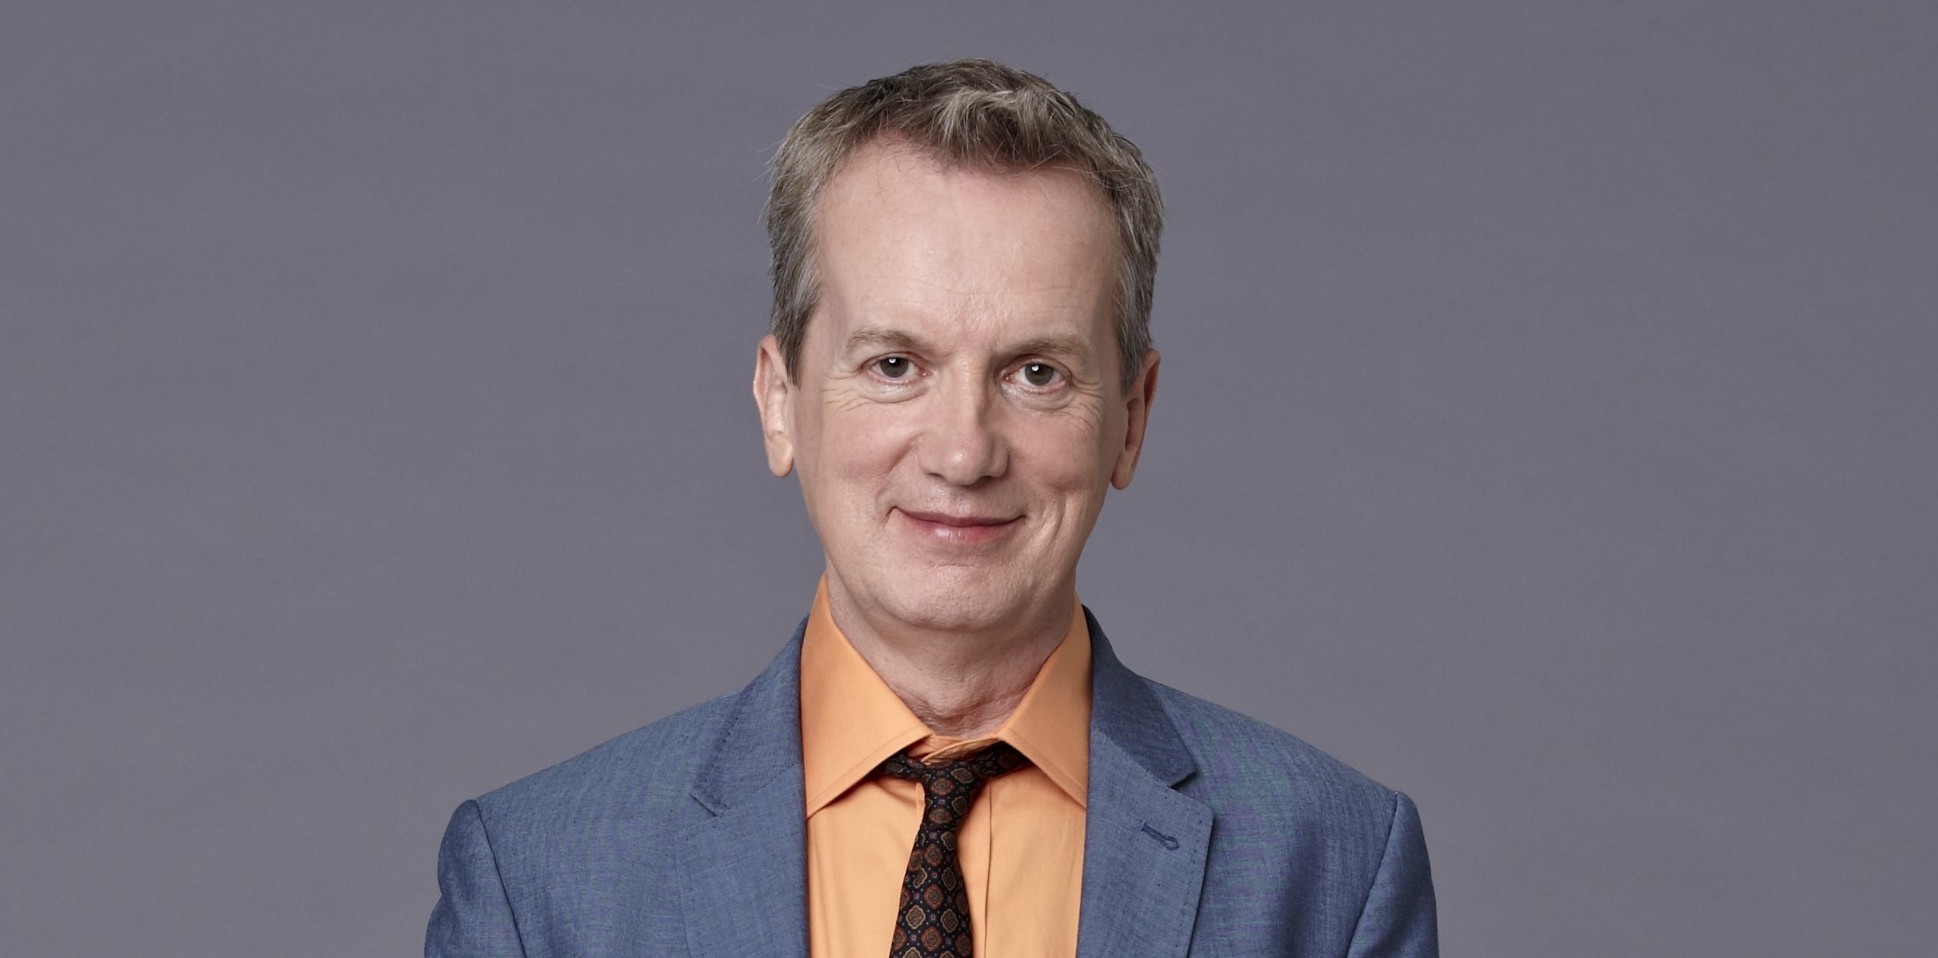 FRANK SKINNER, MAN IN A SUIT: EXTRA LIVE LONDON DATES ANNOUNCED